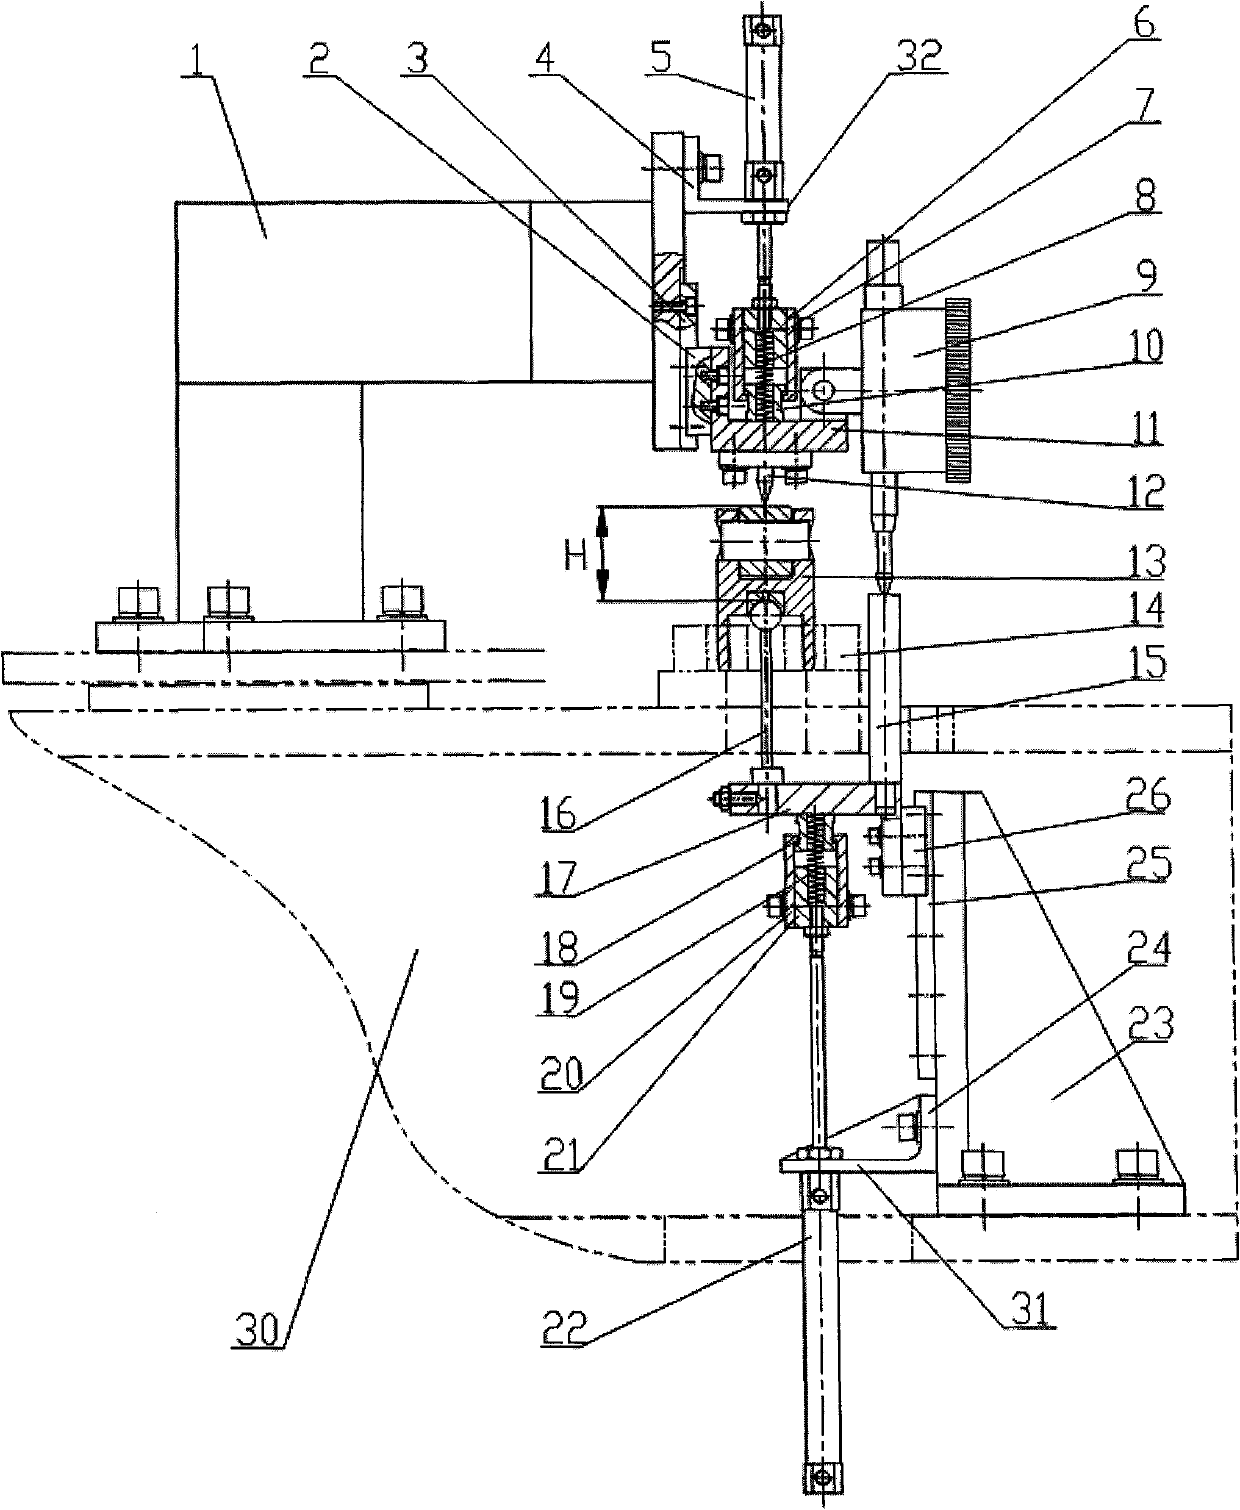 Device for measuring height from vertex of spherical seat of tappet body assembly of automobile fuel injection system to highest point of roller